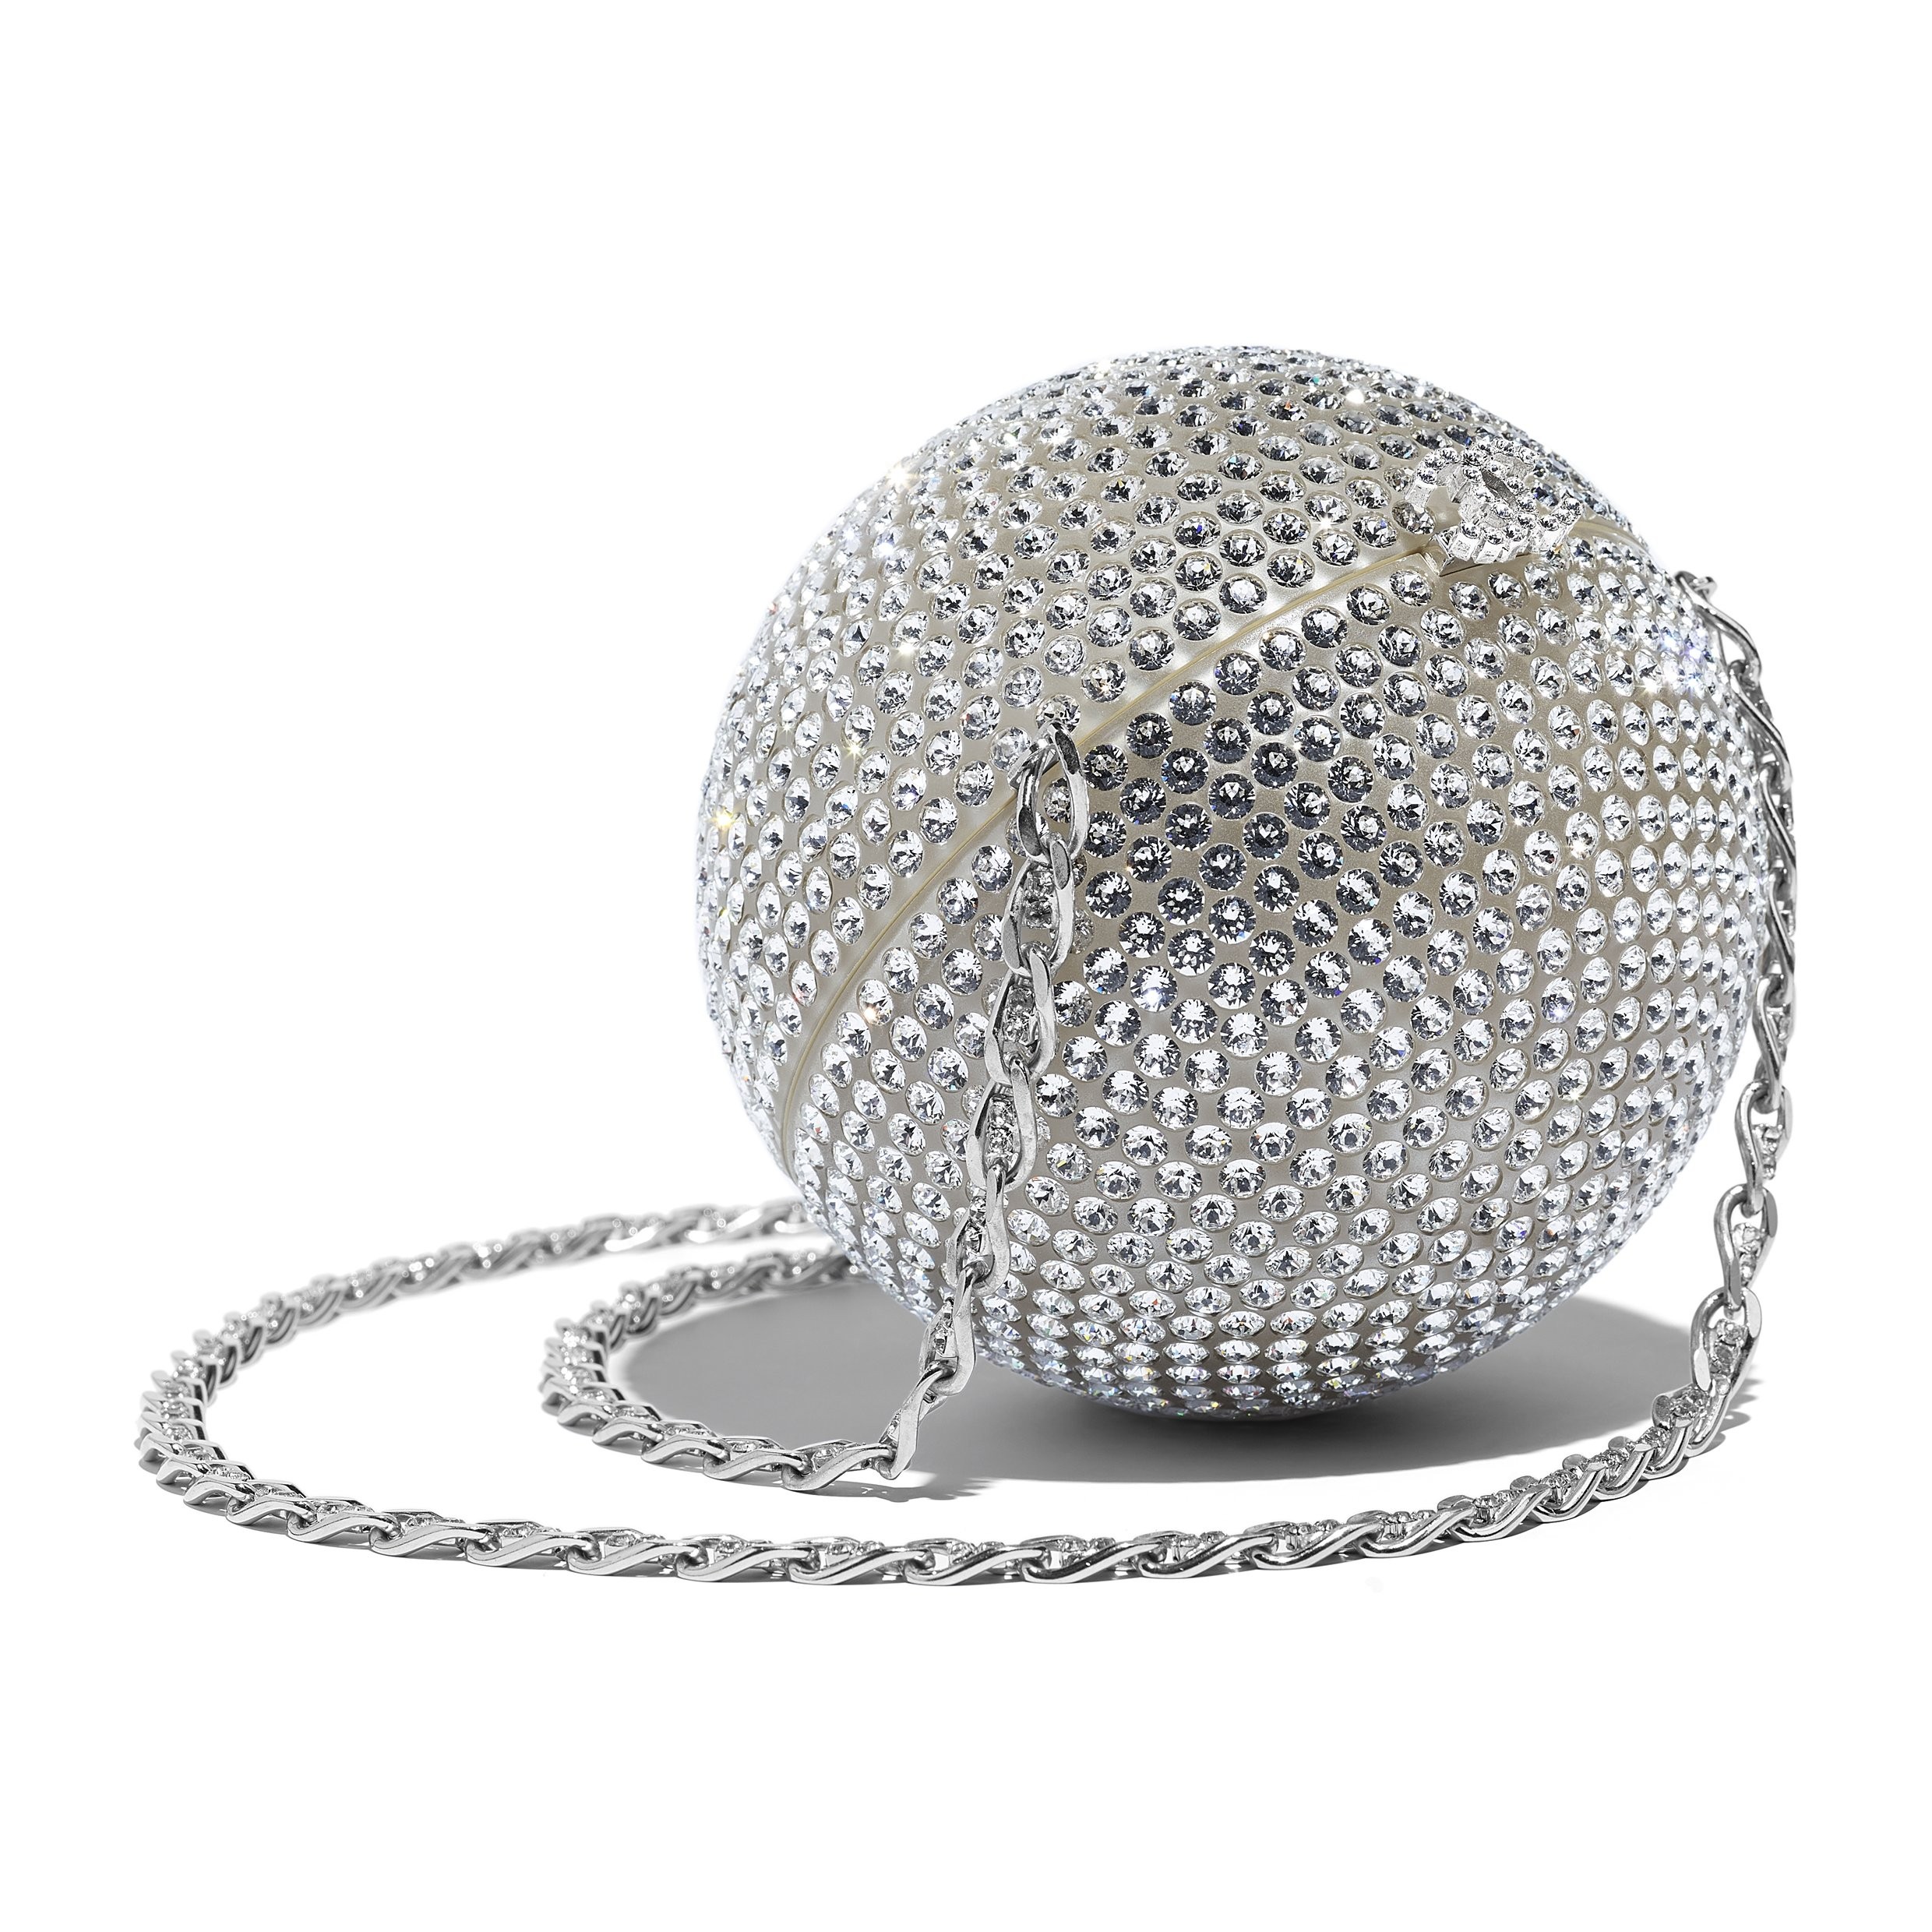 Chanel. Featuring a unique design, the silver minaudière in metal leather and strass is perfect for a night out, HK$115,900